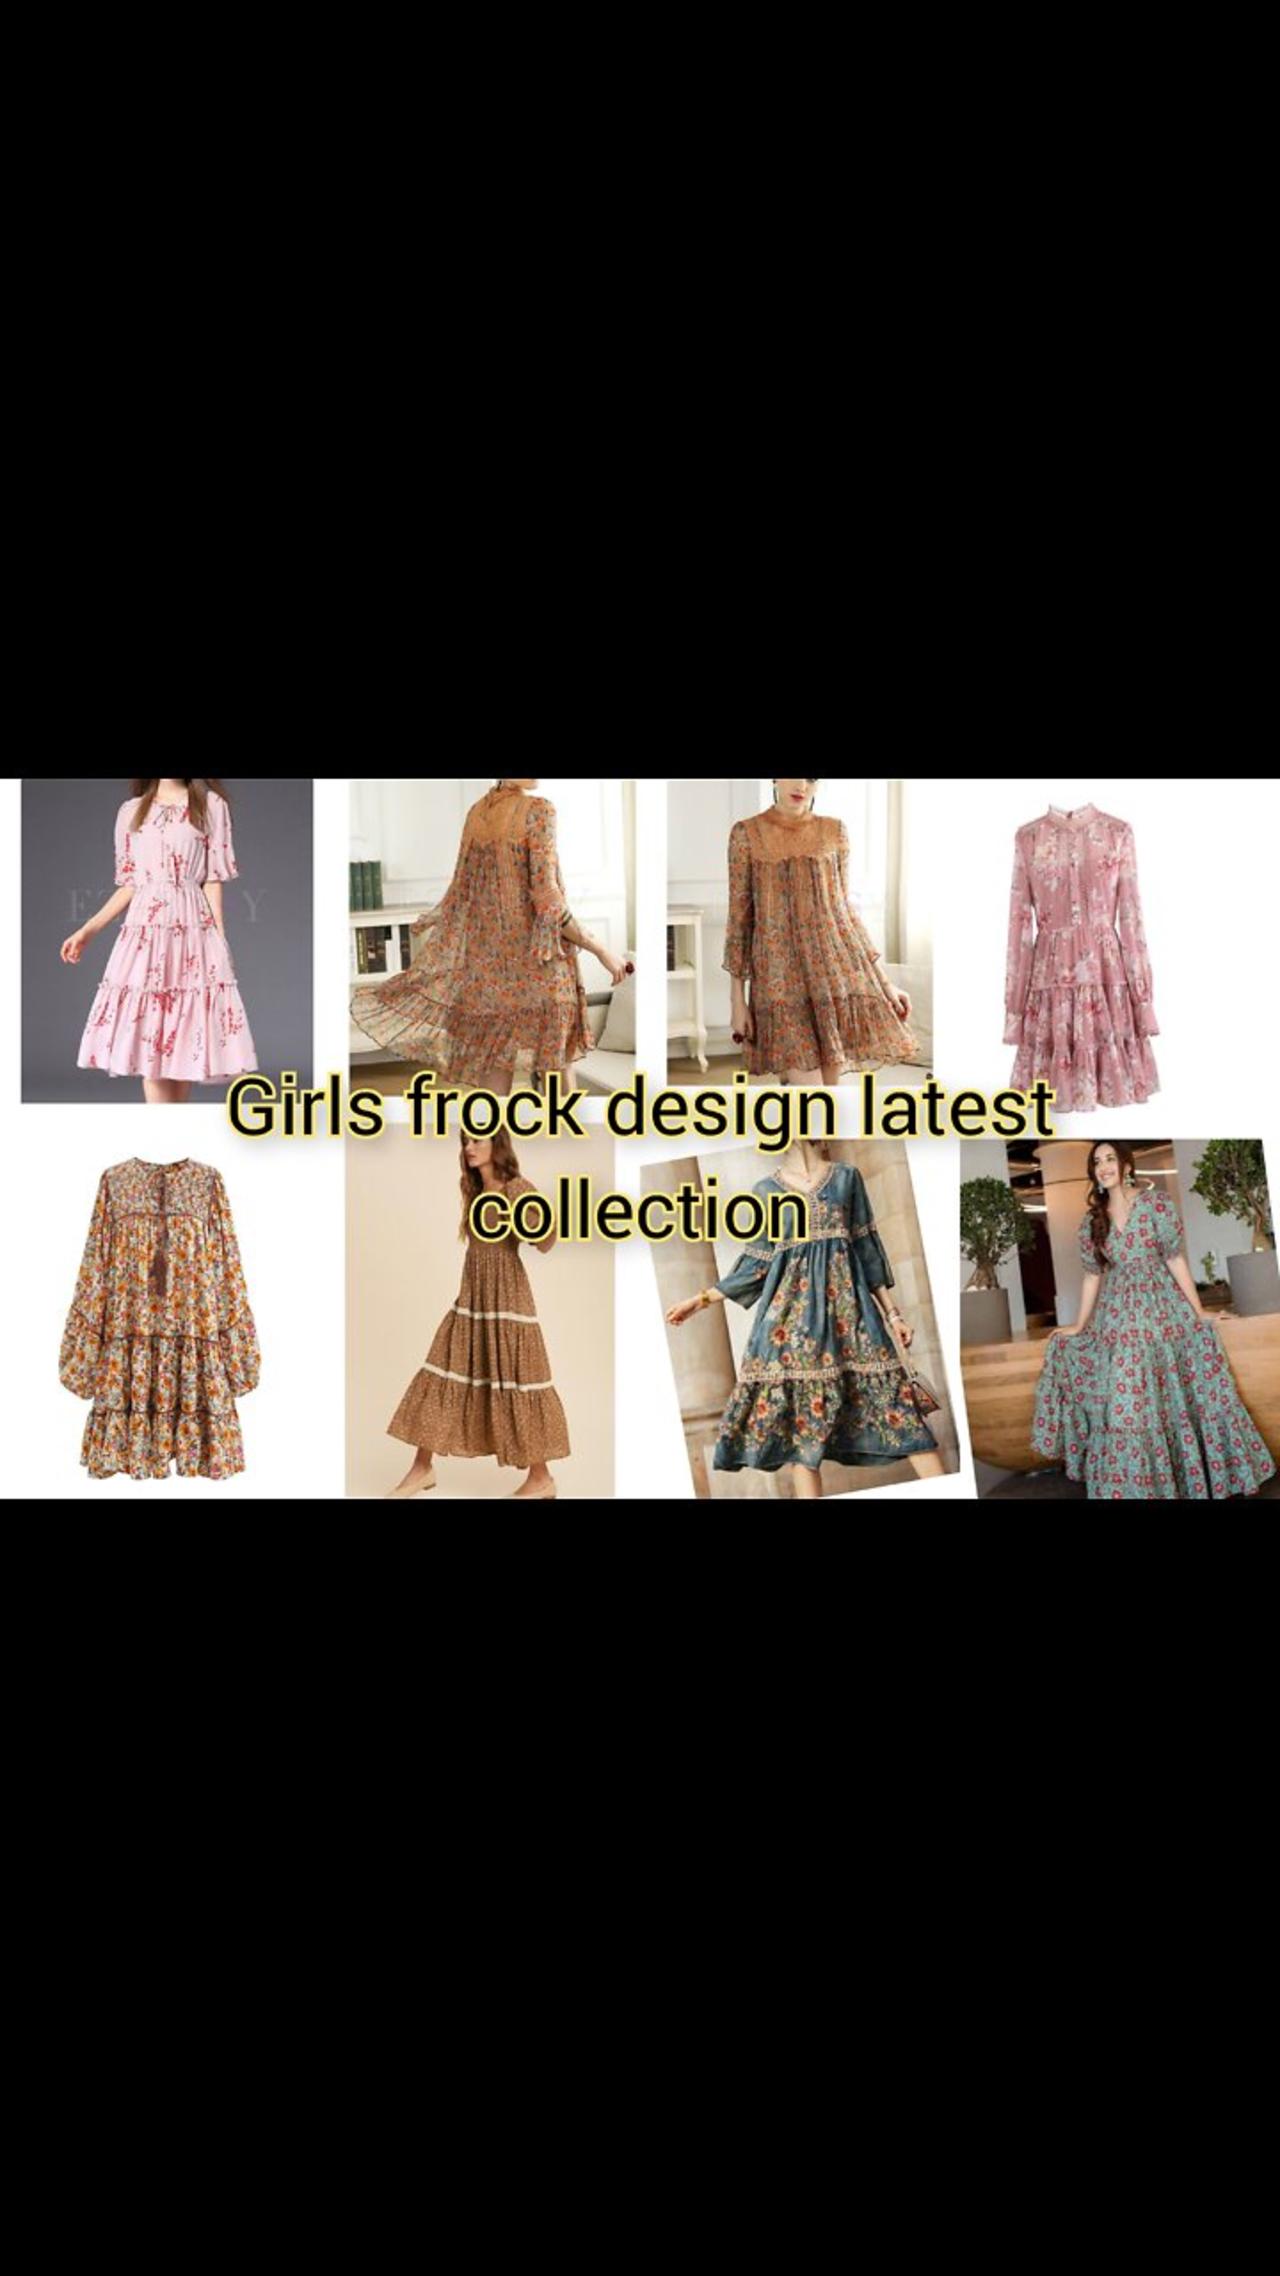 Girls favourite dresses latest collection